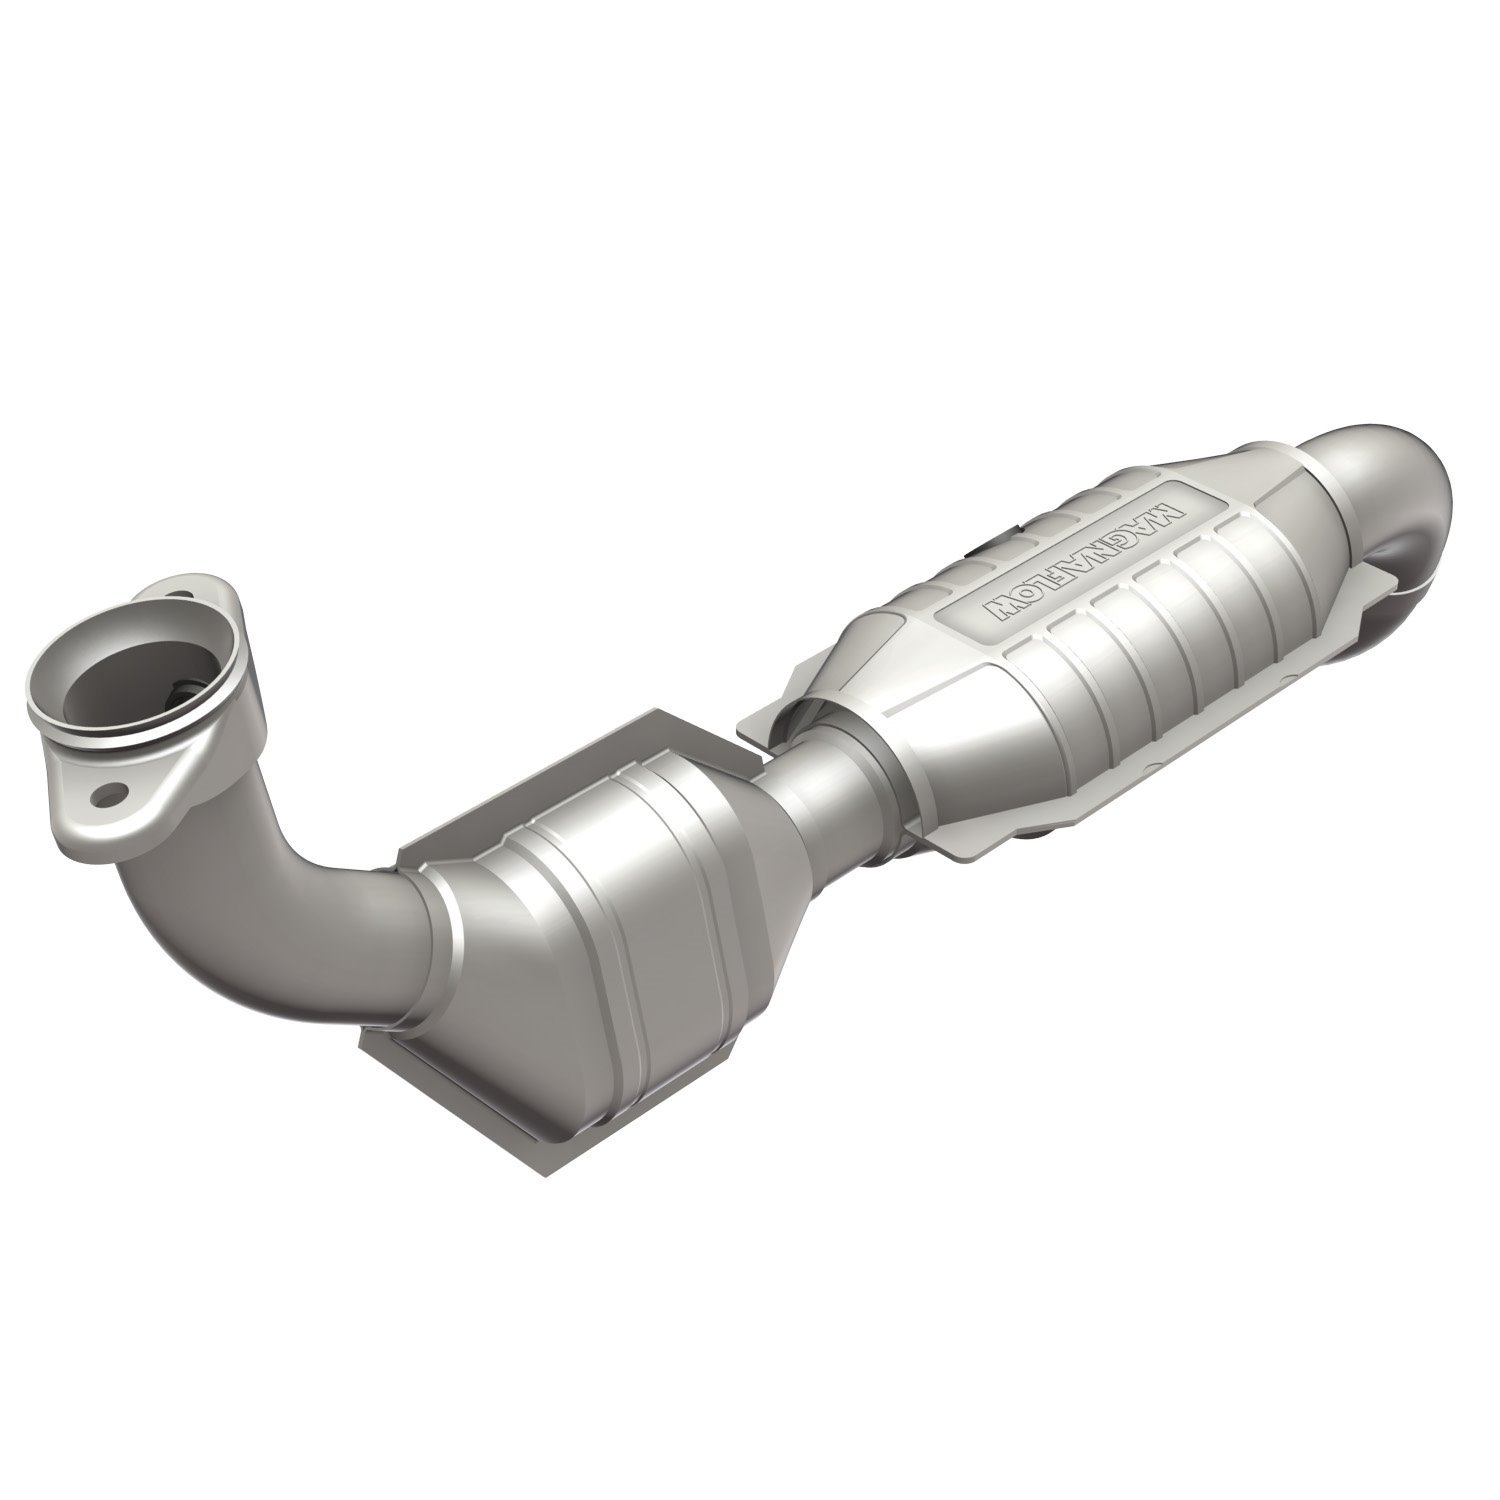 Direct-Fit Catalytic Converter 2004-06 Ford F-150 4WD 5.4L (Except Heritage)